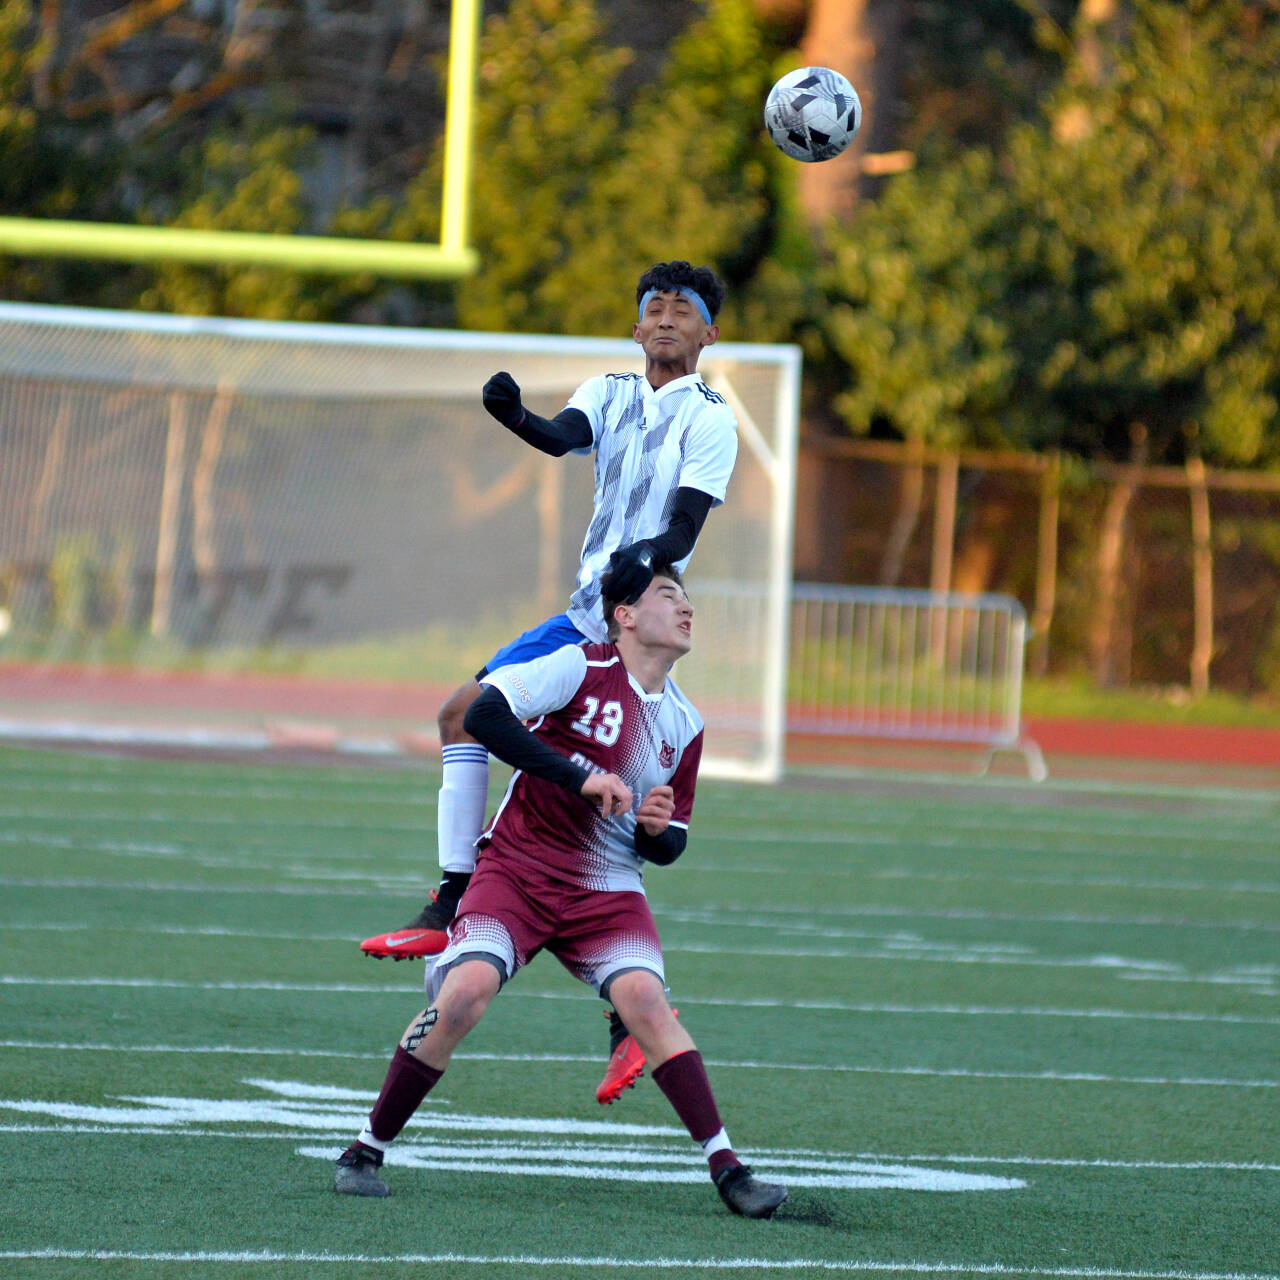 RYAN SPARKS | THE DAILY WORLD Elma defender Ivan Garcia leaps over Montesano’s Felix Romero (13) for a header during Elma’s 3-1 win on Wednesday in Montesano.